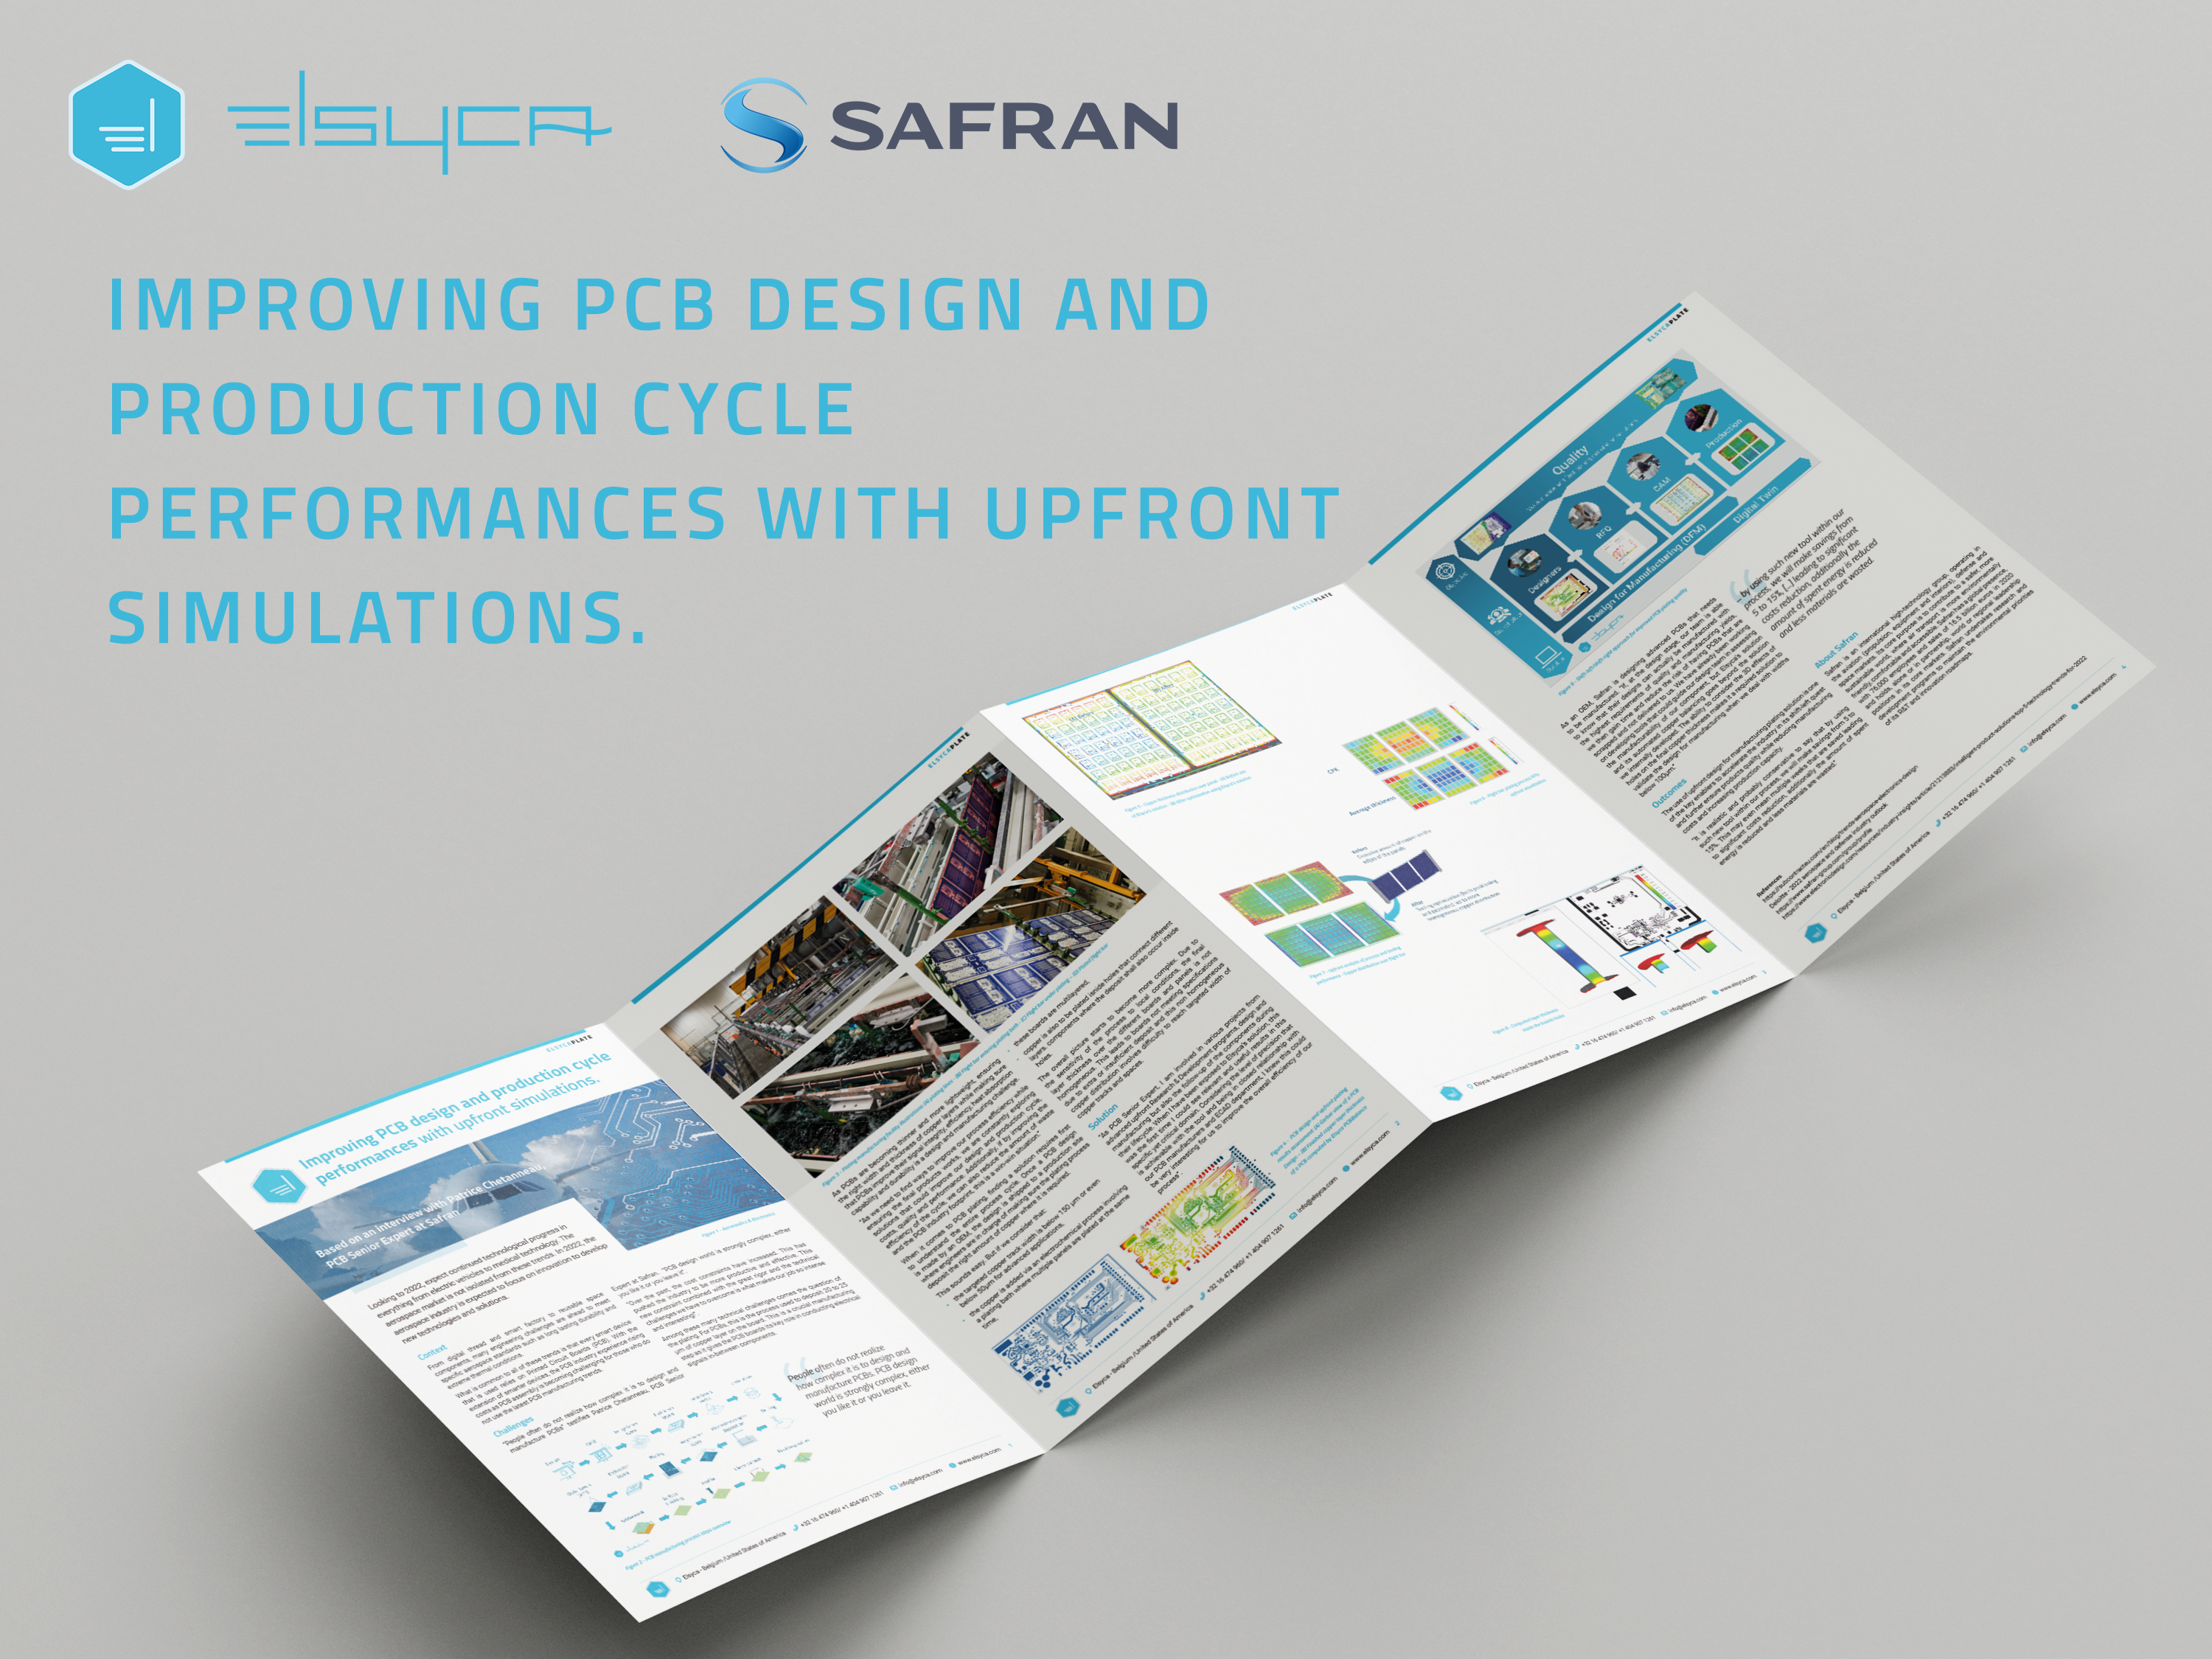 Safran: Improving PCB design and production cycle performances with upfront simulations.